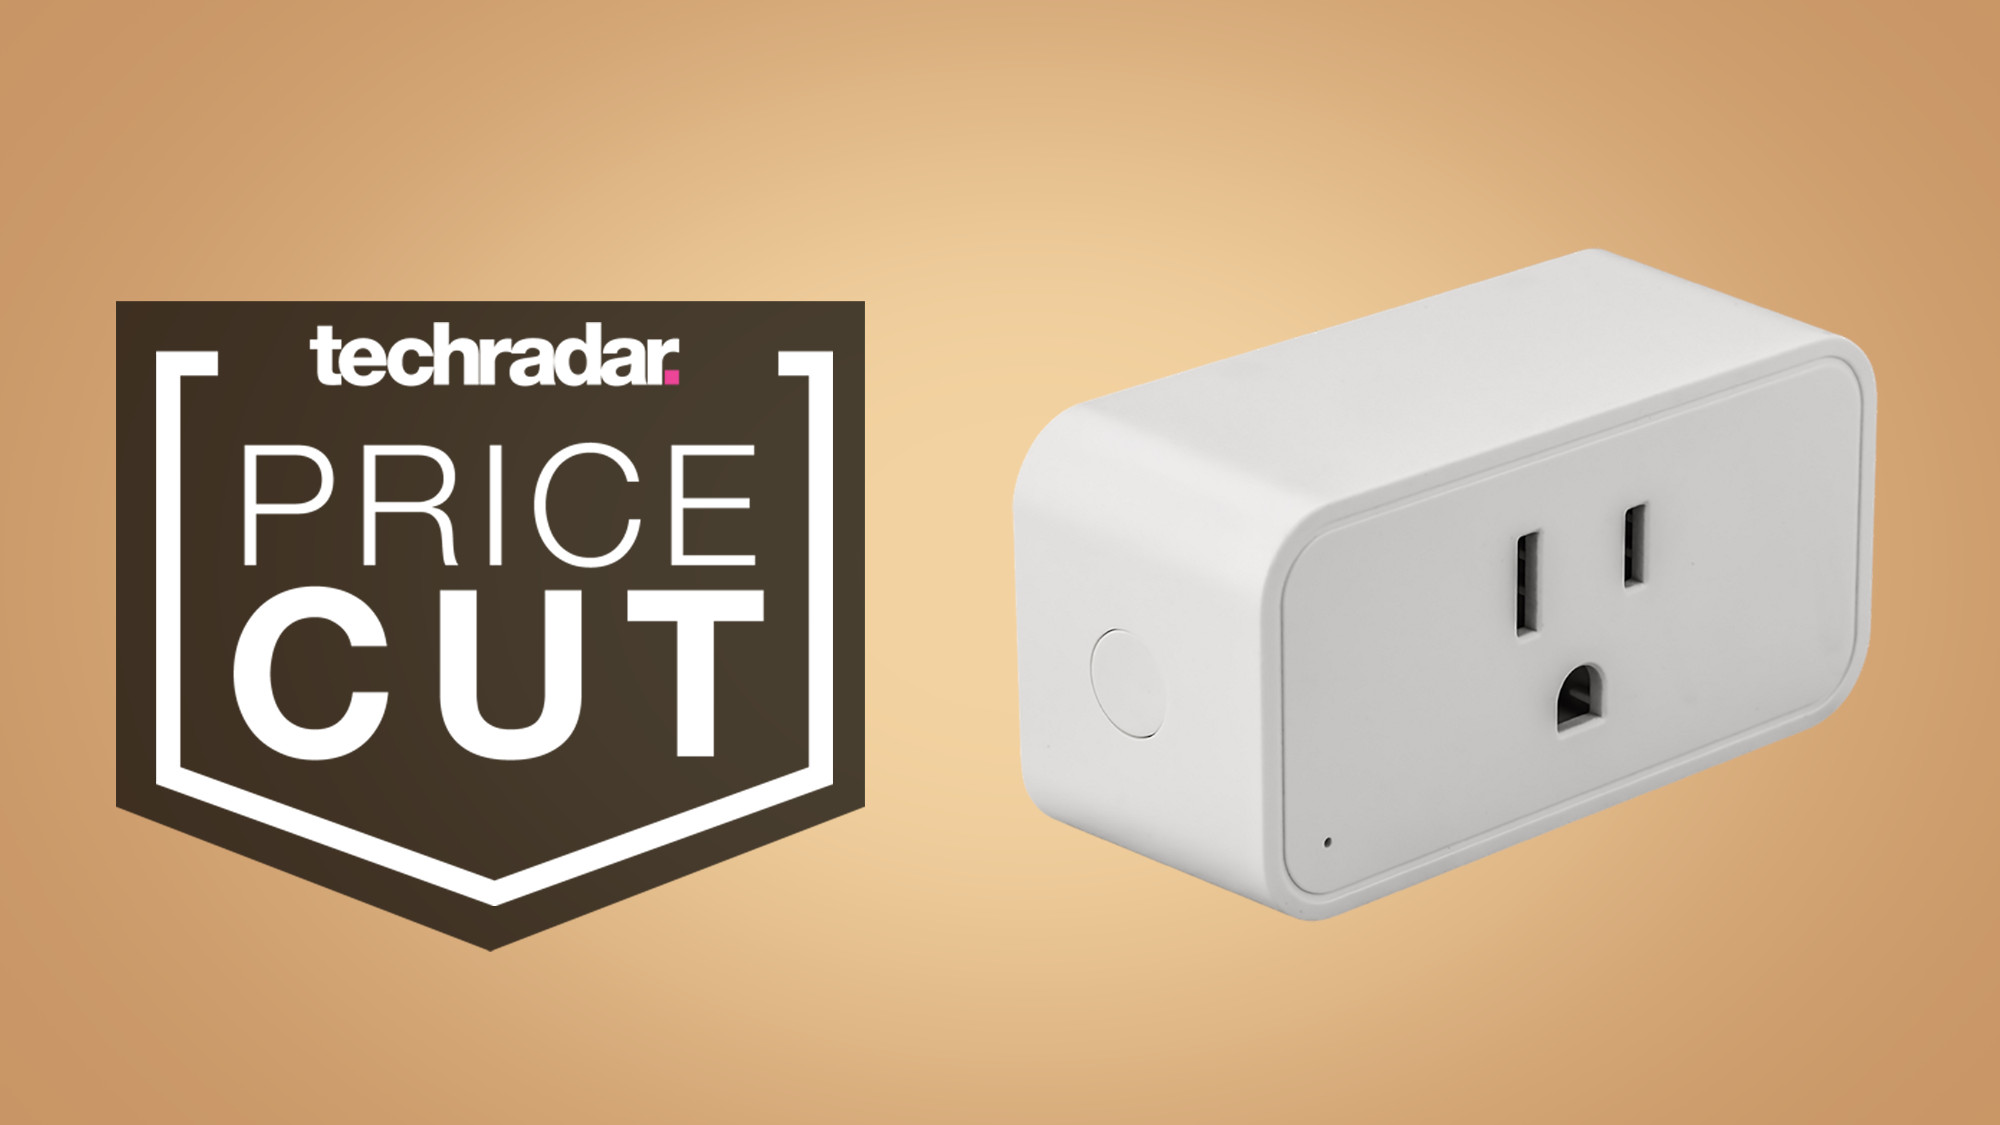 Amazon Smart Plug on creme background with price cut text